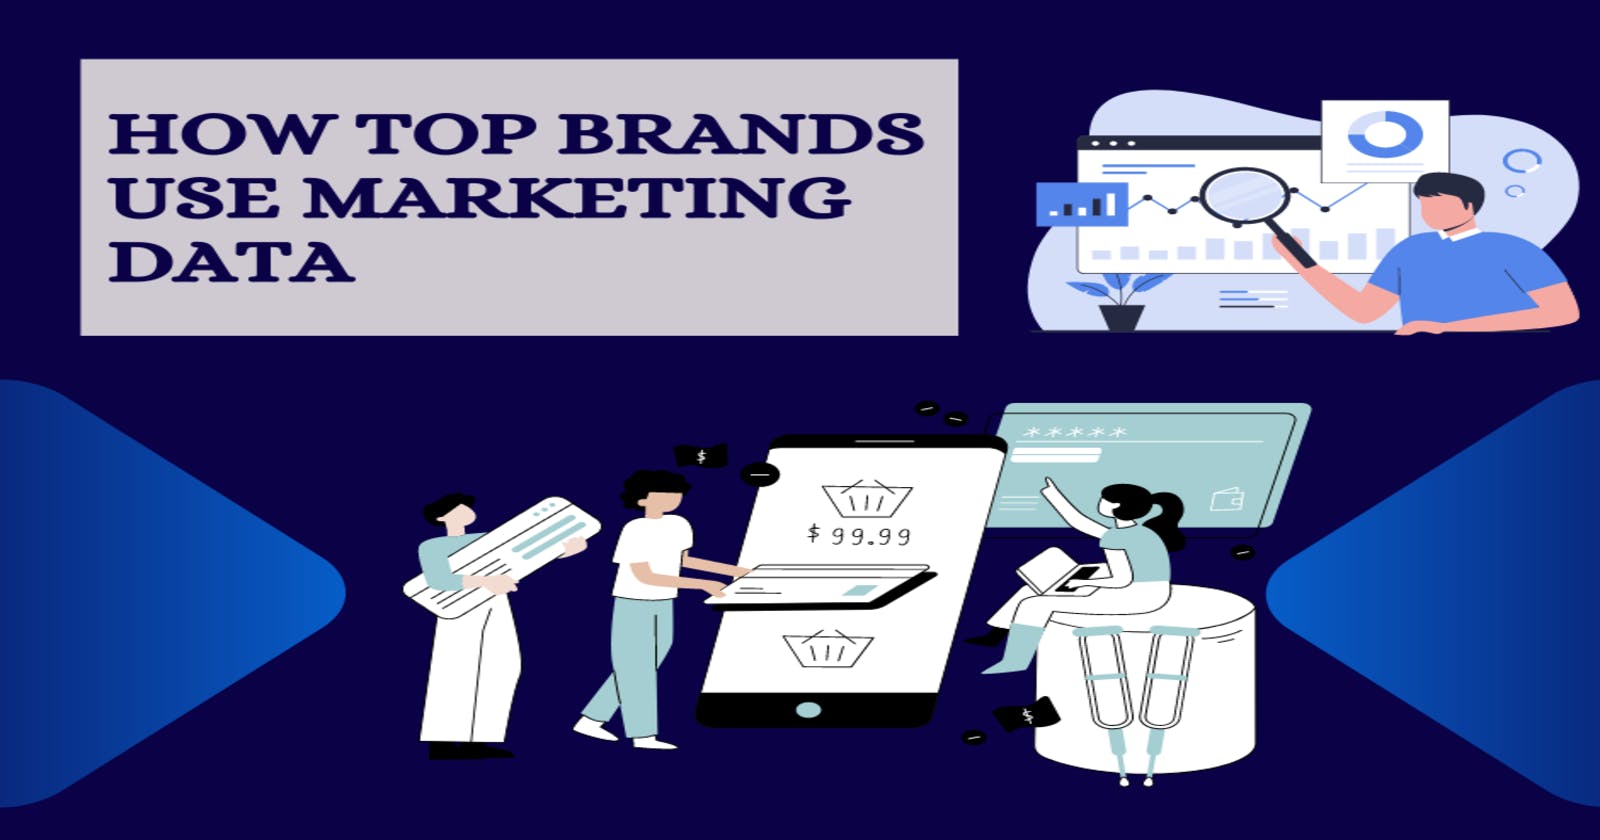 How Top Brands Use Marketing Data